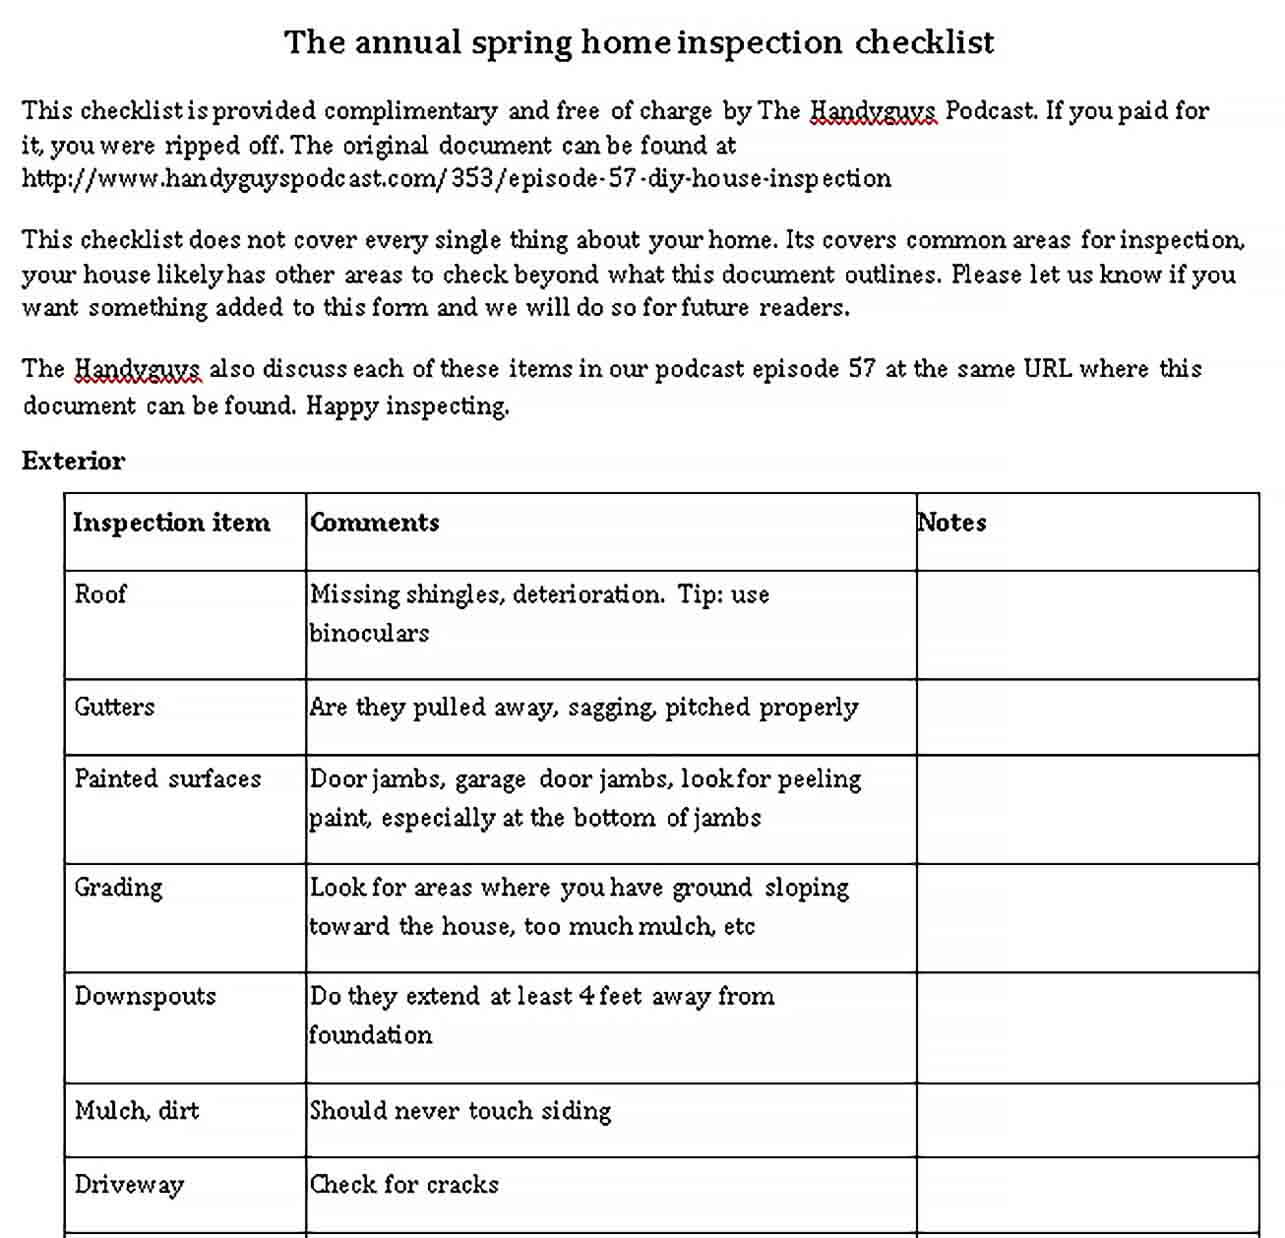 Sample Annual Home Inspection Checklist Template